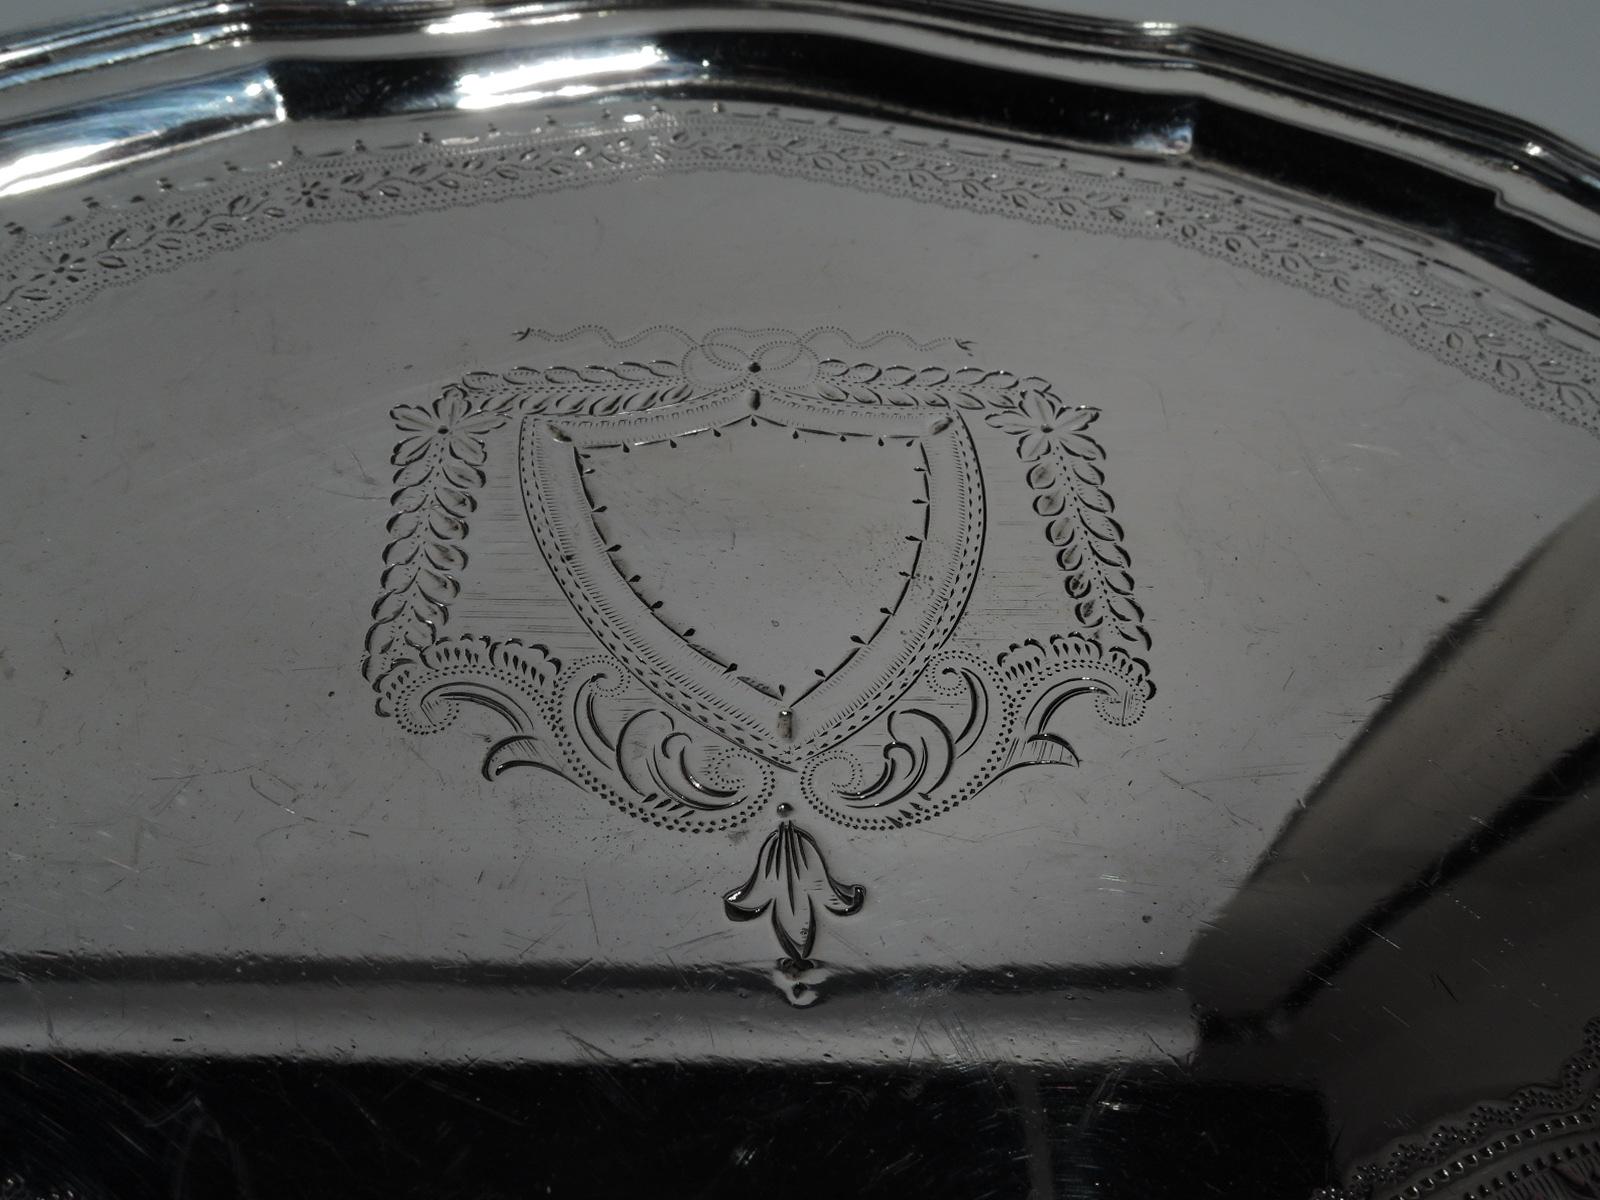 George V sterling silver salver. Made by Ellis Jacob Greenberg in Birmingham in 1923. Curvilinear cartouche with molded rim on 4 triangular supports. Engraved armorial (vacant) and ornamental border. Hallmarked. Weight: 6 troy ounces.